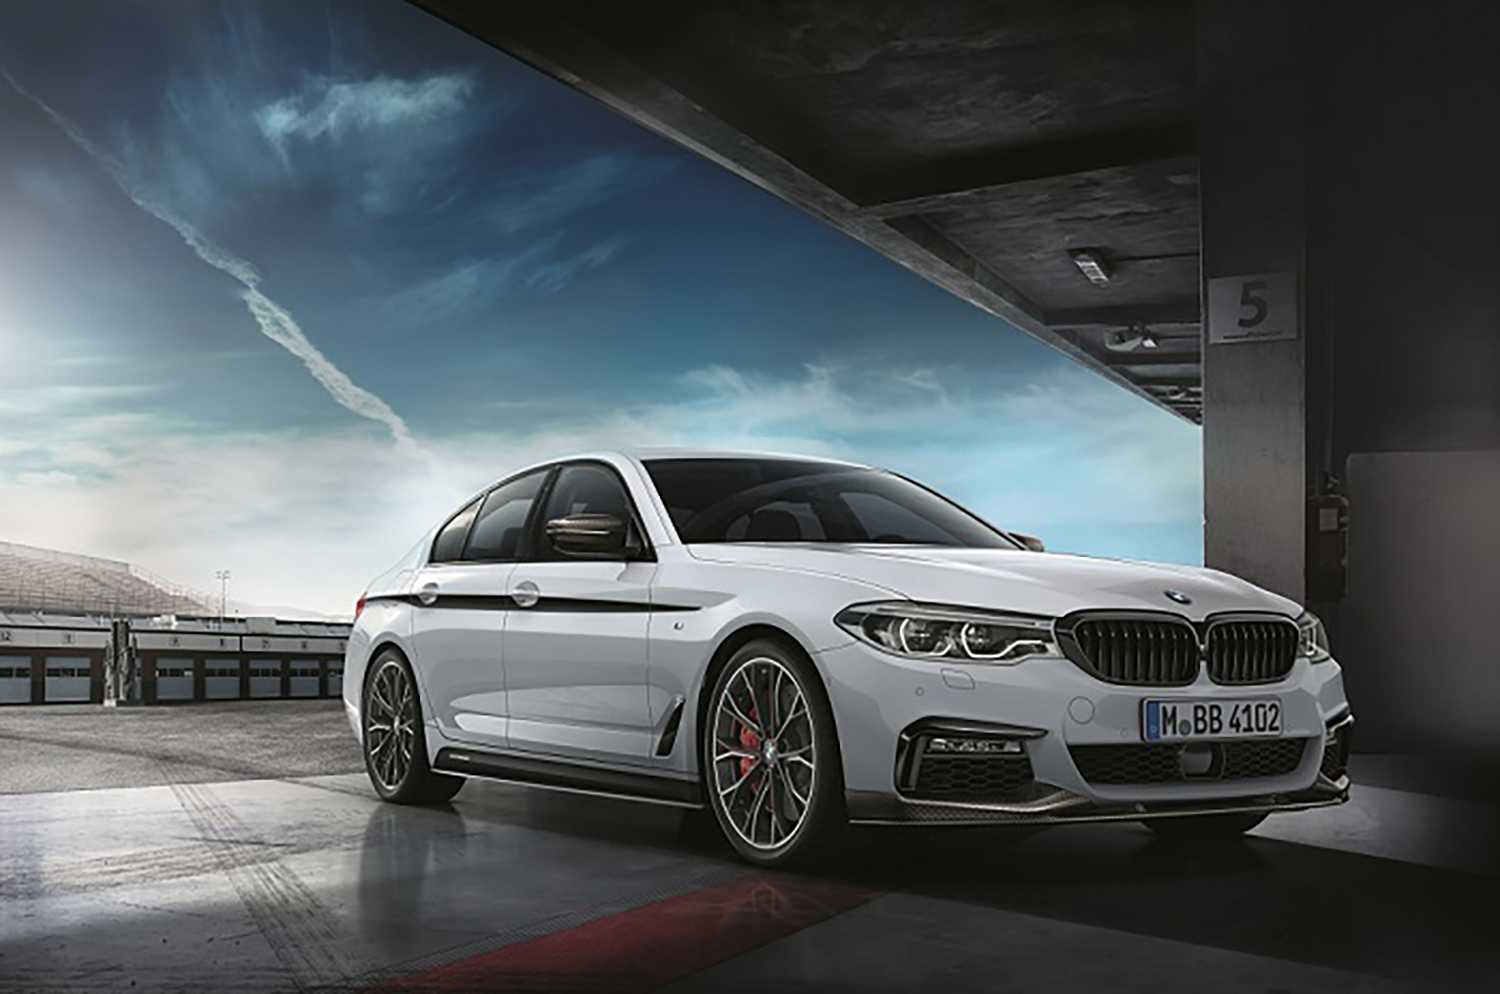 Brilliance in every detail: BMW showcases a range of BMW M